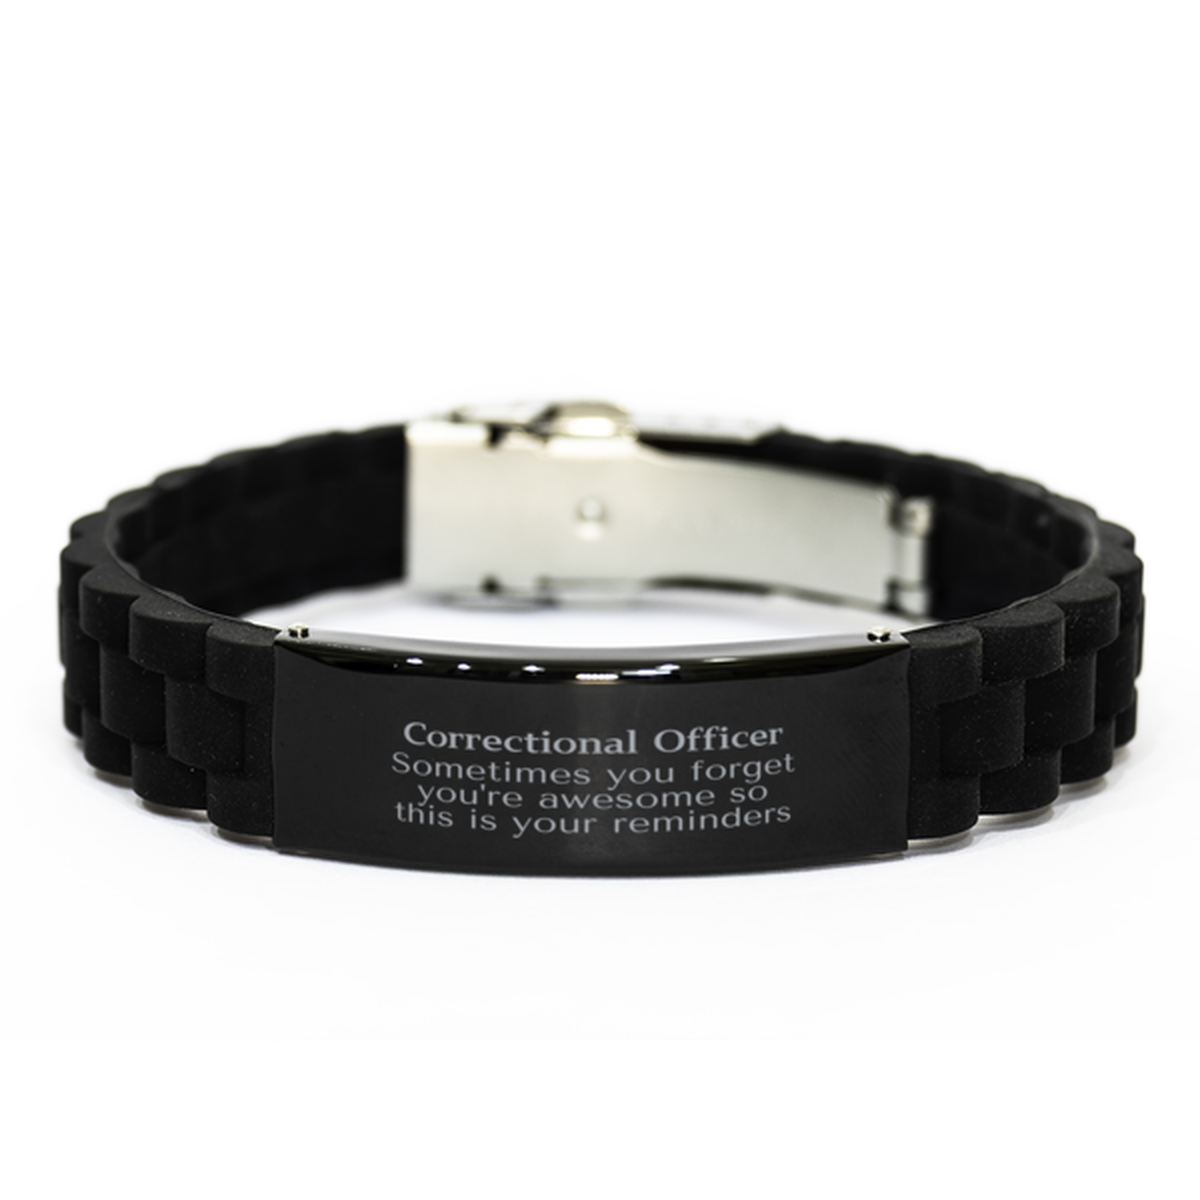 Sentimental Correctional Officer Black Glidelock Clasp Bracelet, Correctional Officer Sometimes you forget you're awesome so this is your reminders, Graduation Christmas Birthday Gifts for Correctional Officer, Men, Women, Coworkers